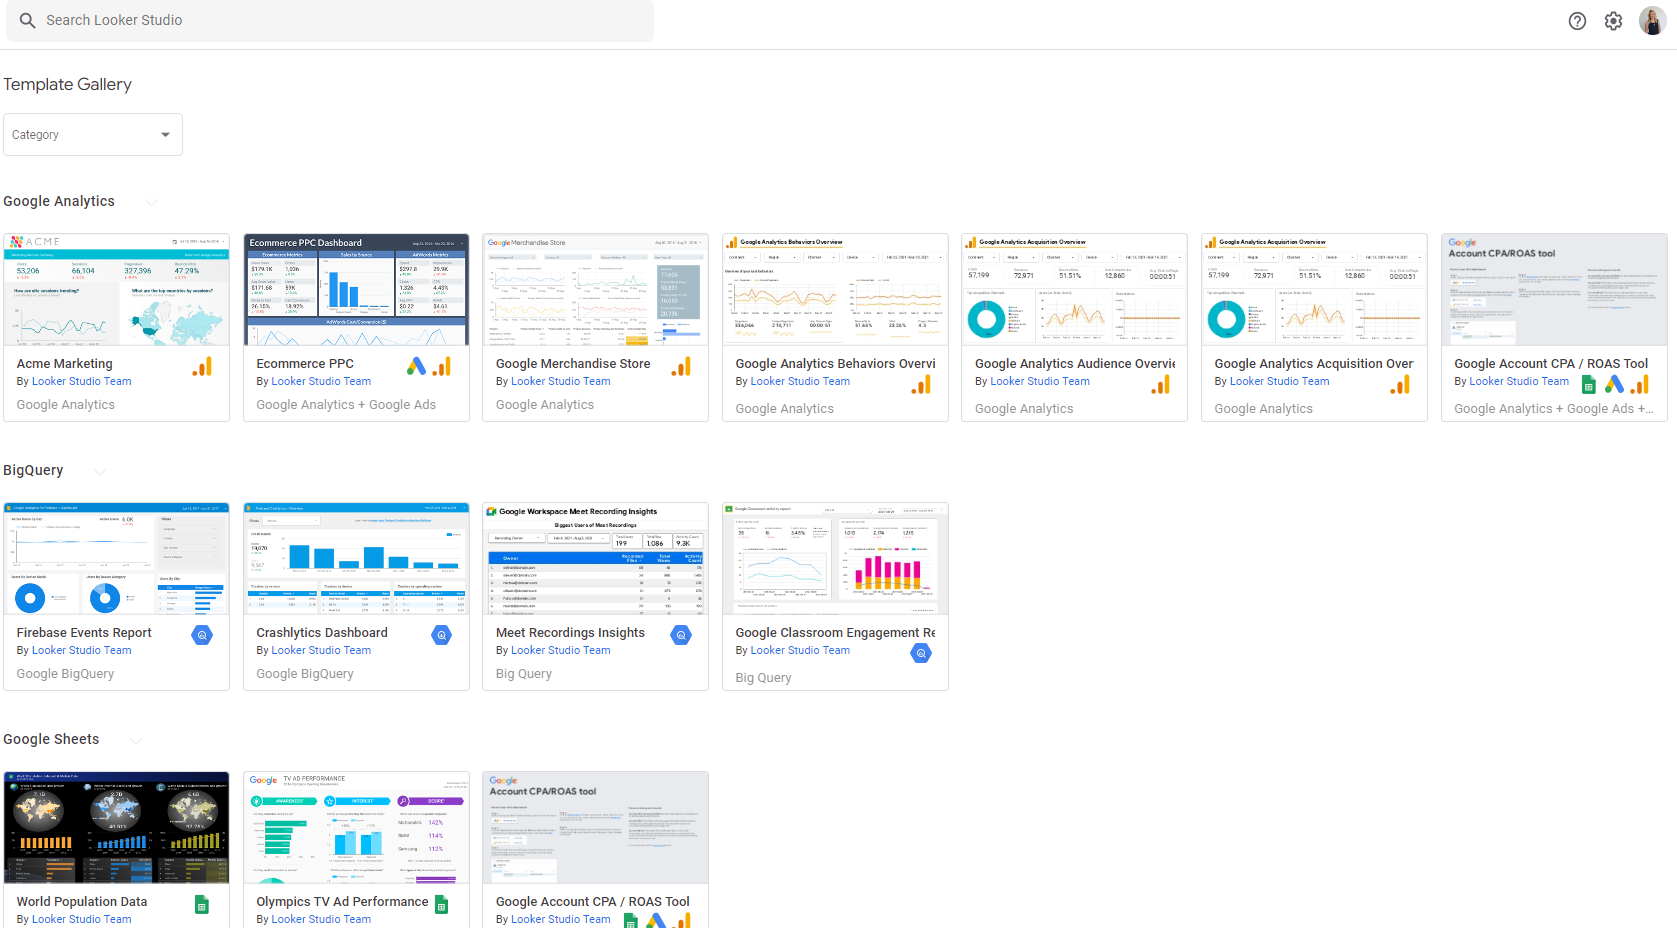 Looker Studio provides many dashboard templates to get you started.